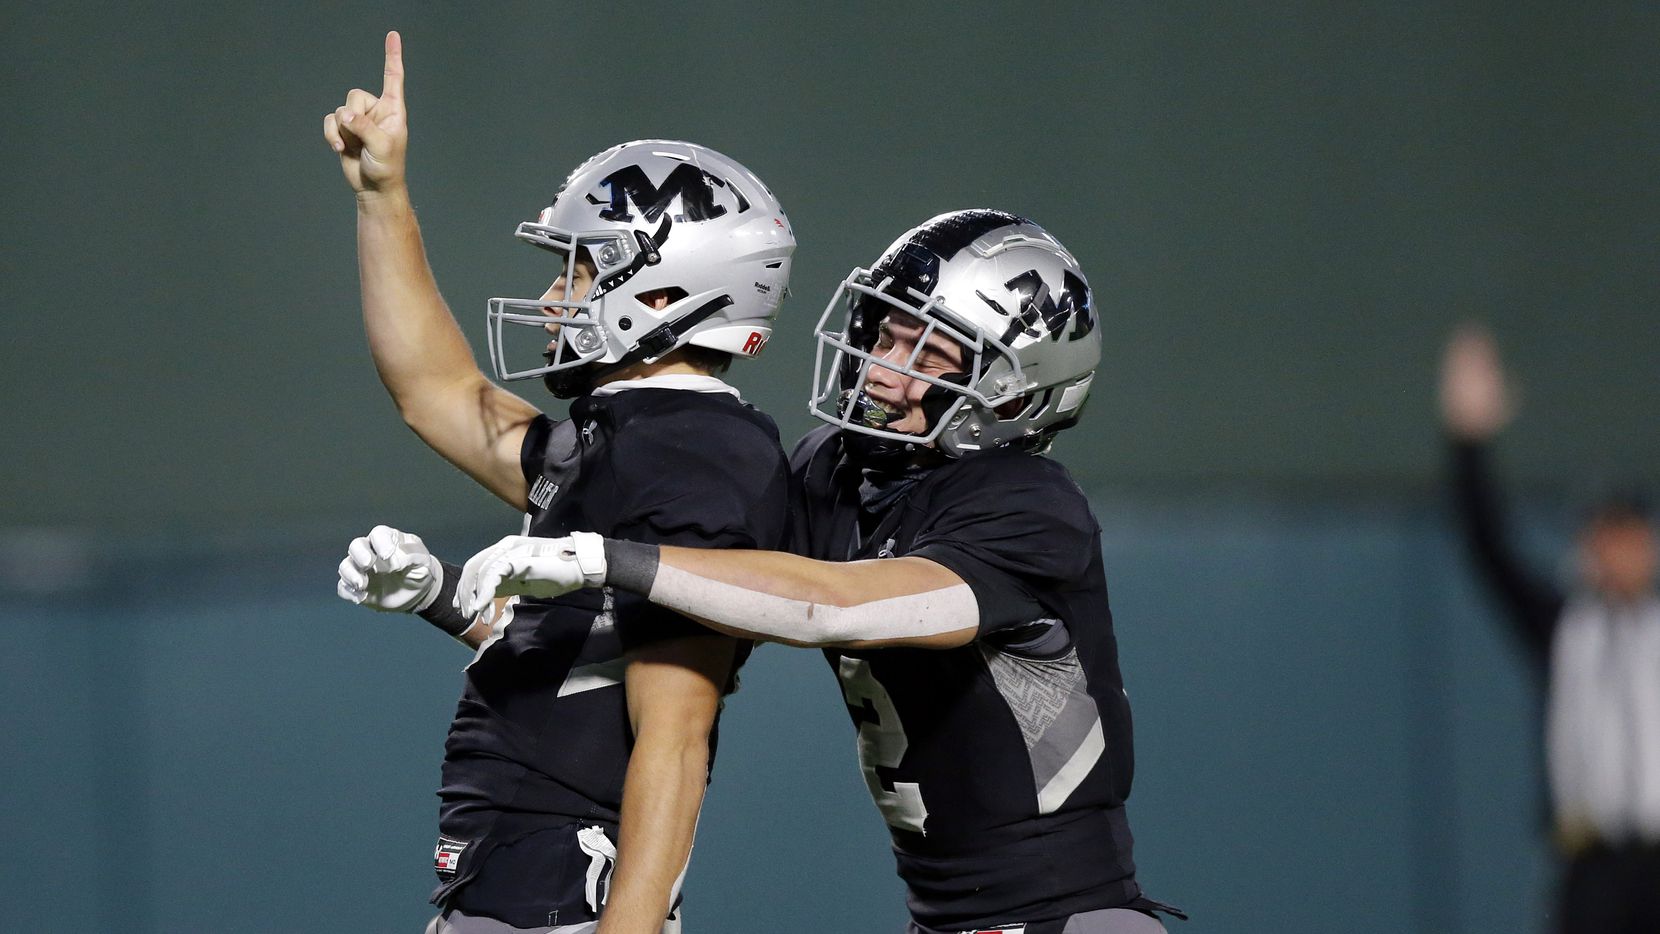 Arlington Martin quarterback Zach Mundell (left) is congratulated by teammate Cydd Ford (2) after scoring the winning touchdown in overtime against Arlington Lamar at Globe Life Park in Arlington, Friday, October 30, 2020. Martin defeated Lamar in overtime, 38-31.